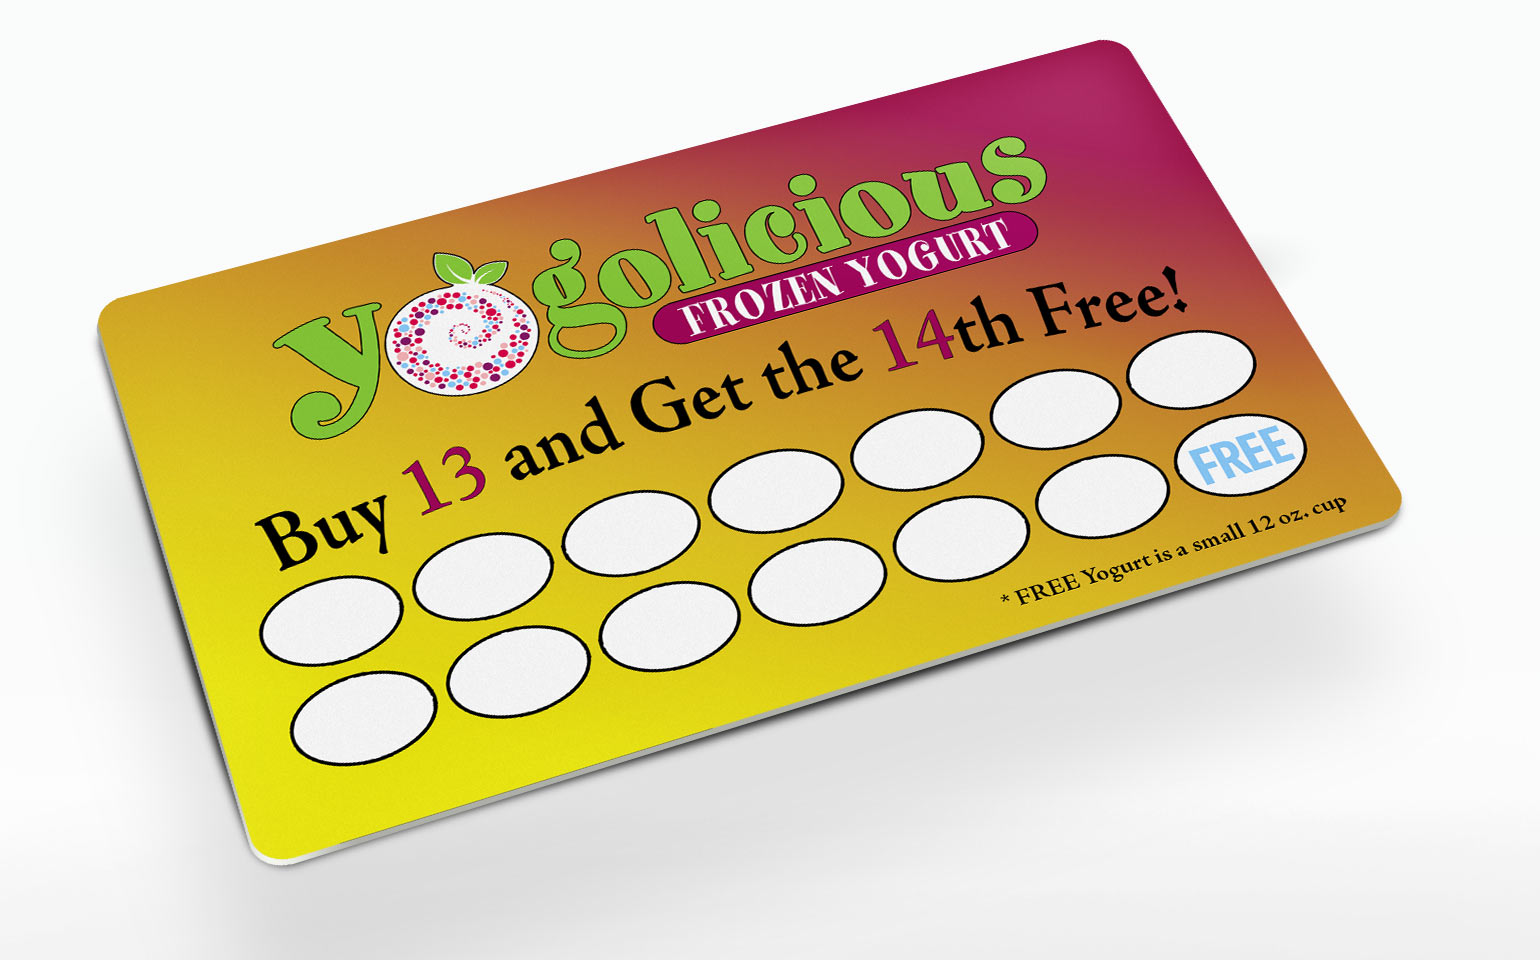 Buy 13, Get 14th Free Promotion